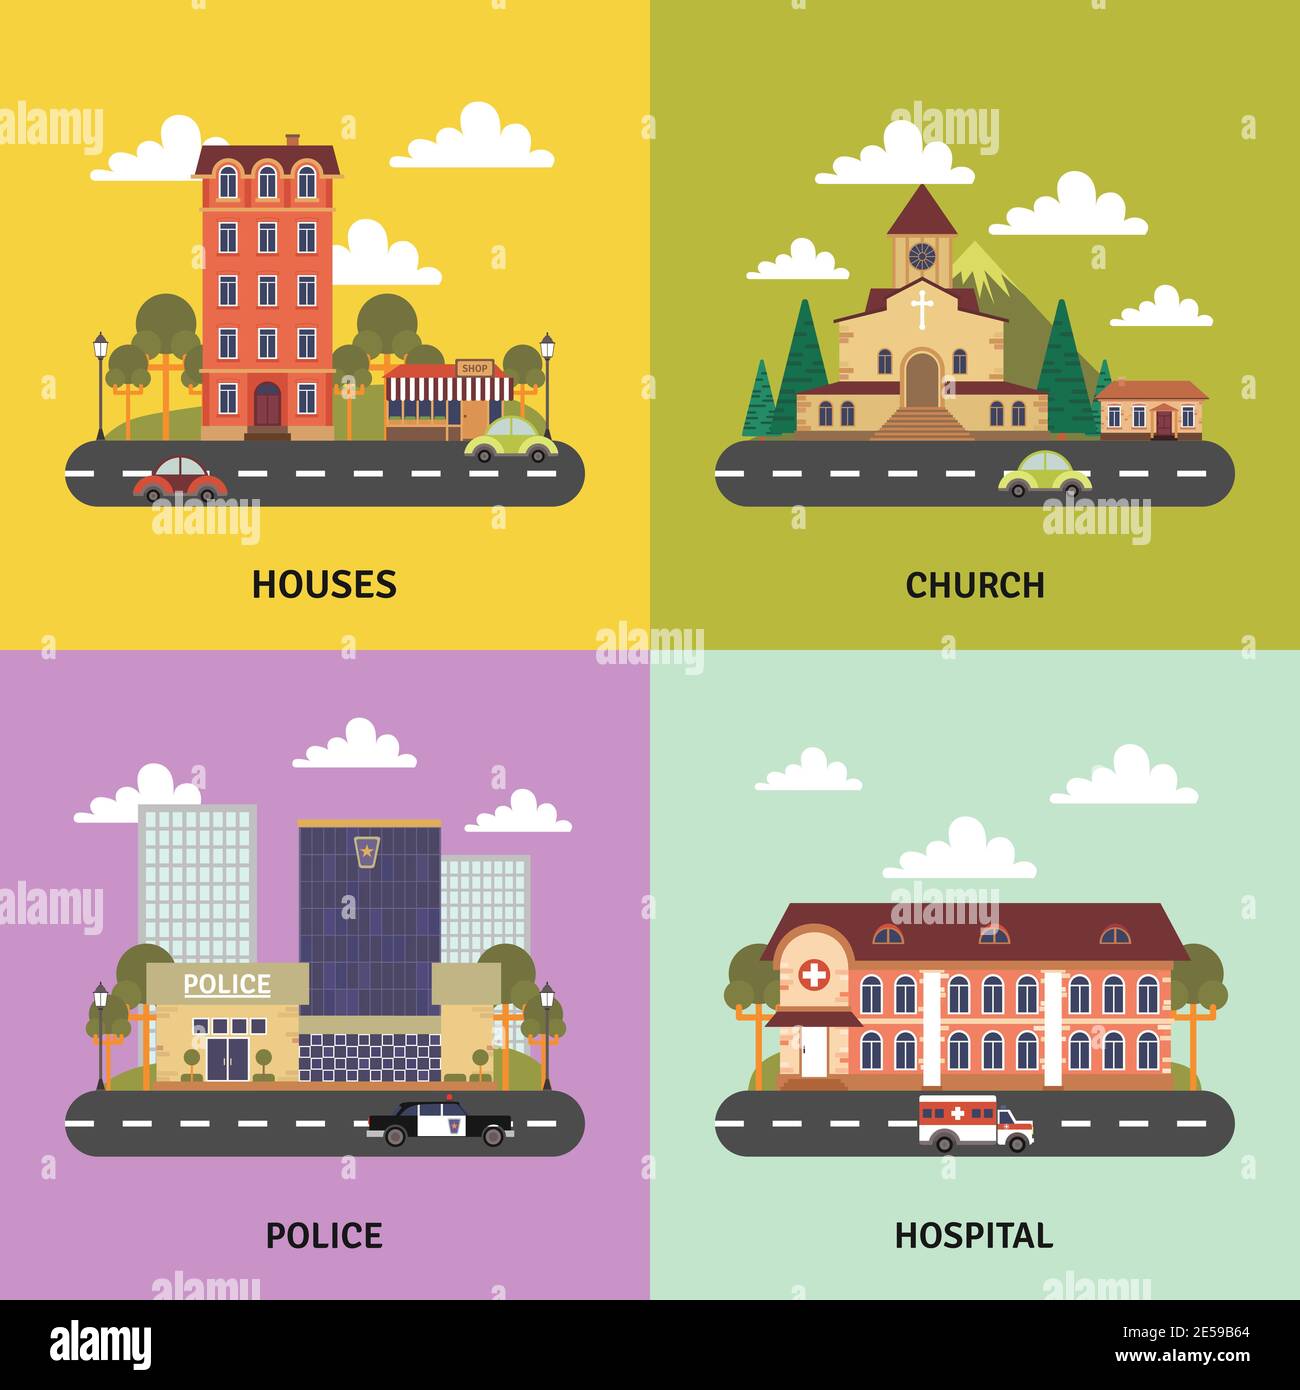 Urban landscape 4 flat icons square composition banner with police department and church abstract isolated vector illustration Stock Vector